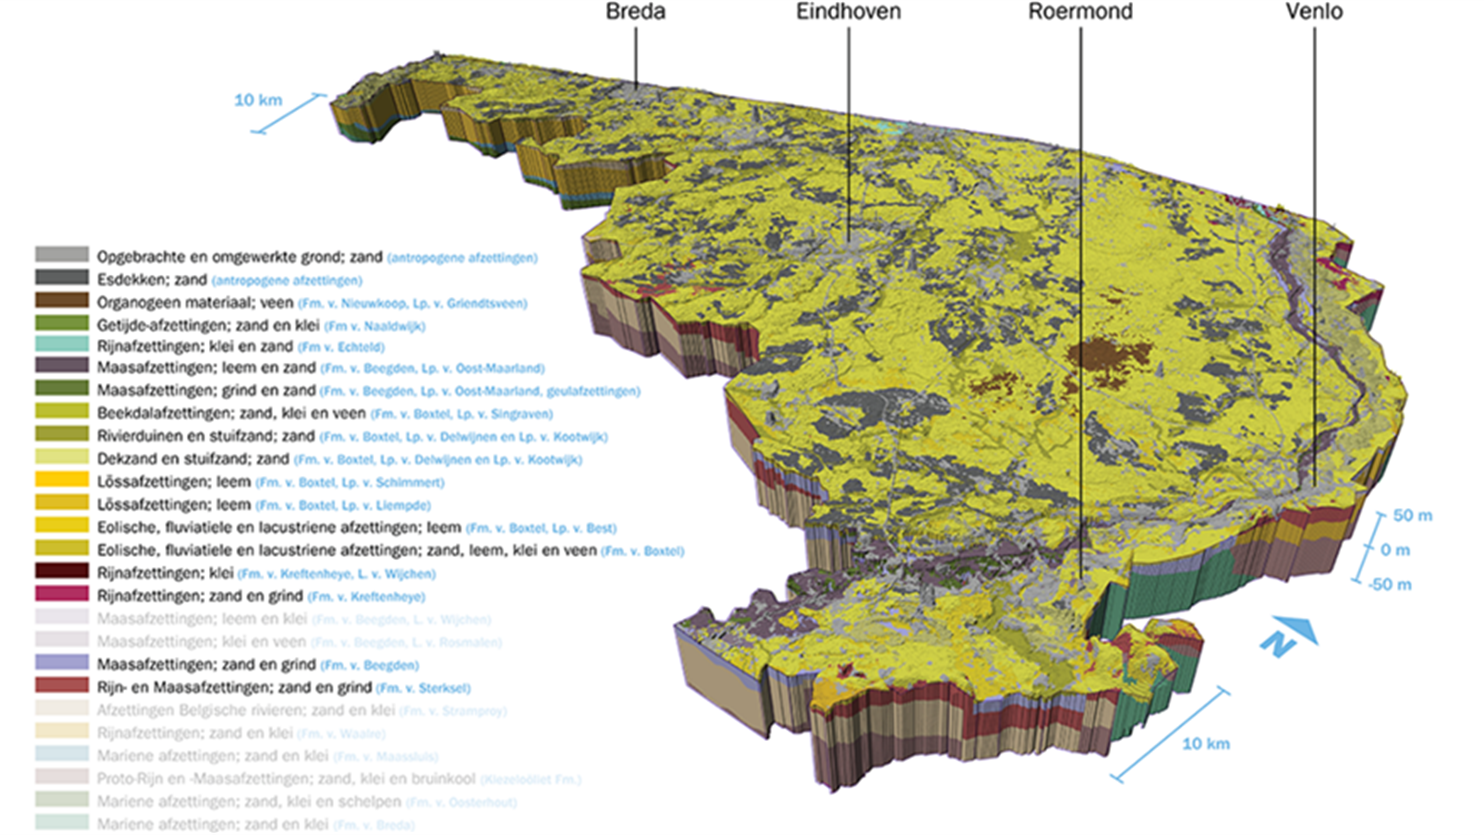 Impression of the GeoTOP model of North Brabant and North & Central Limburg with geological units and their main soil types.